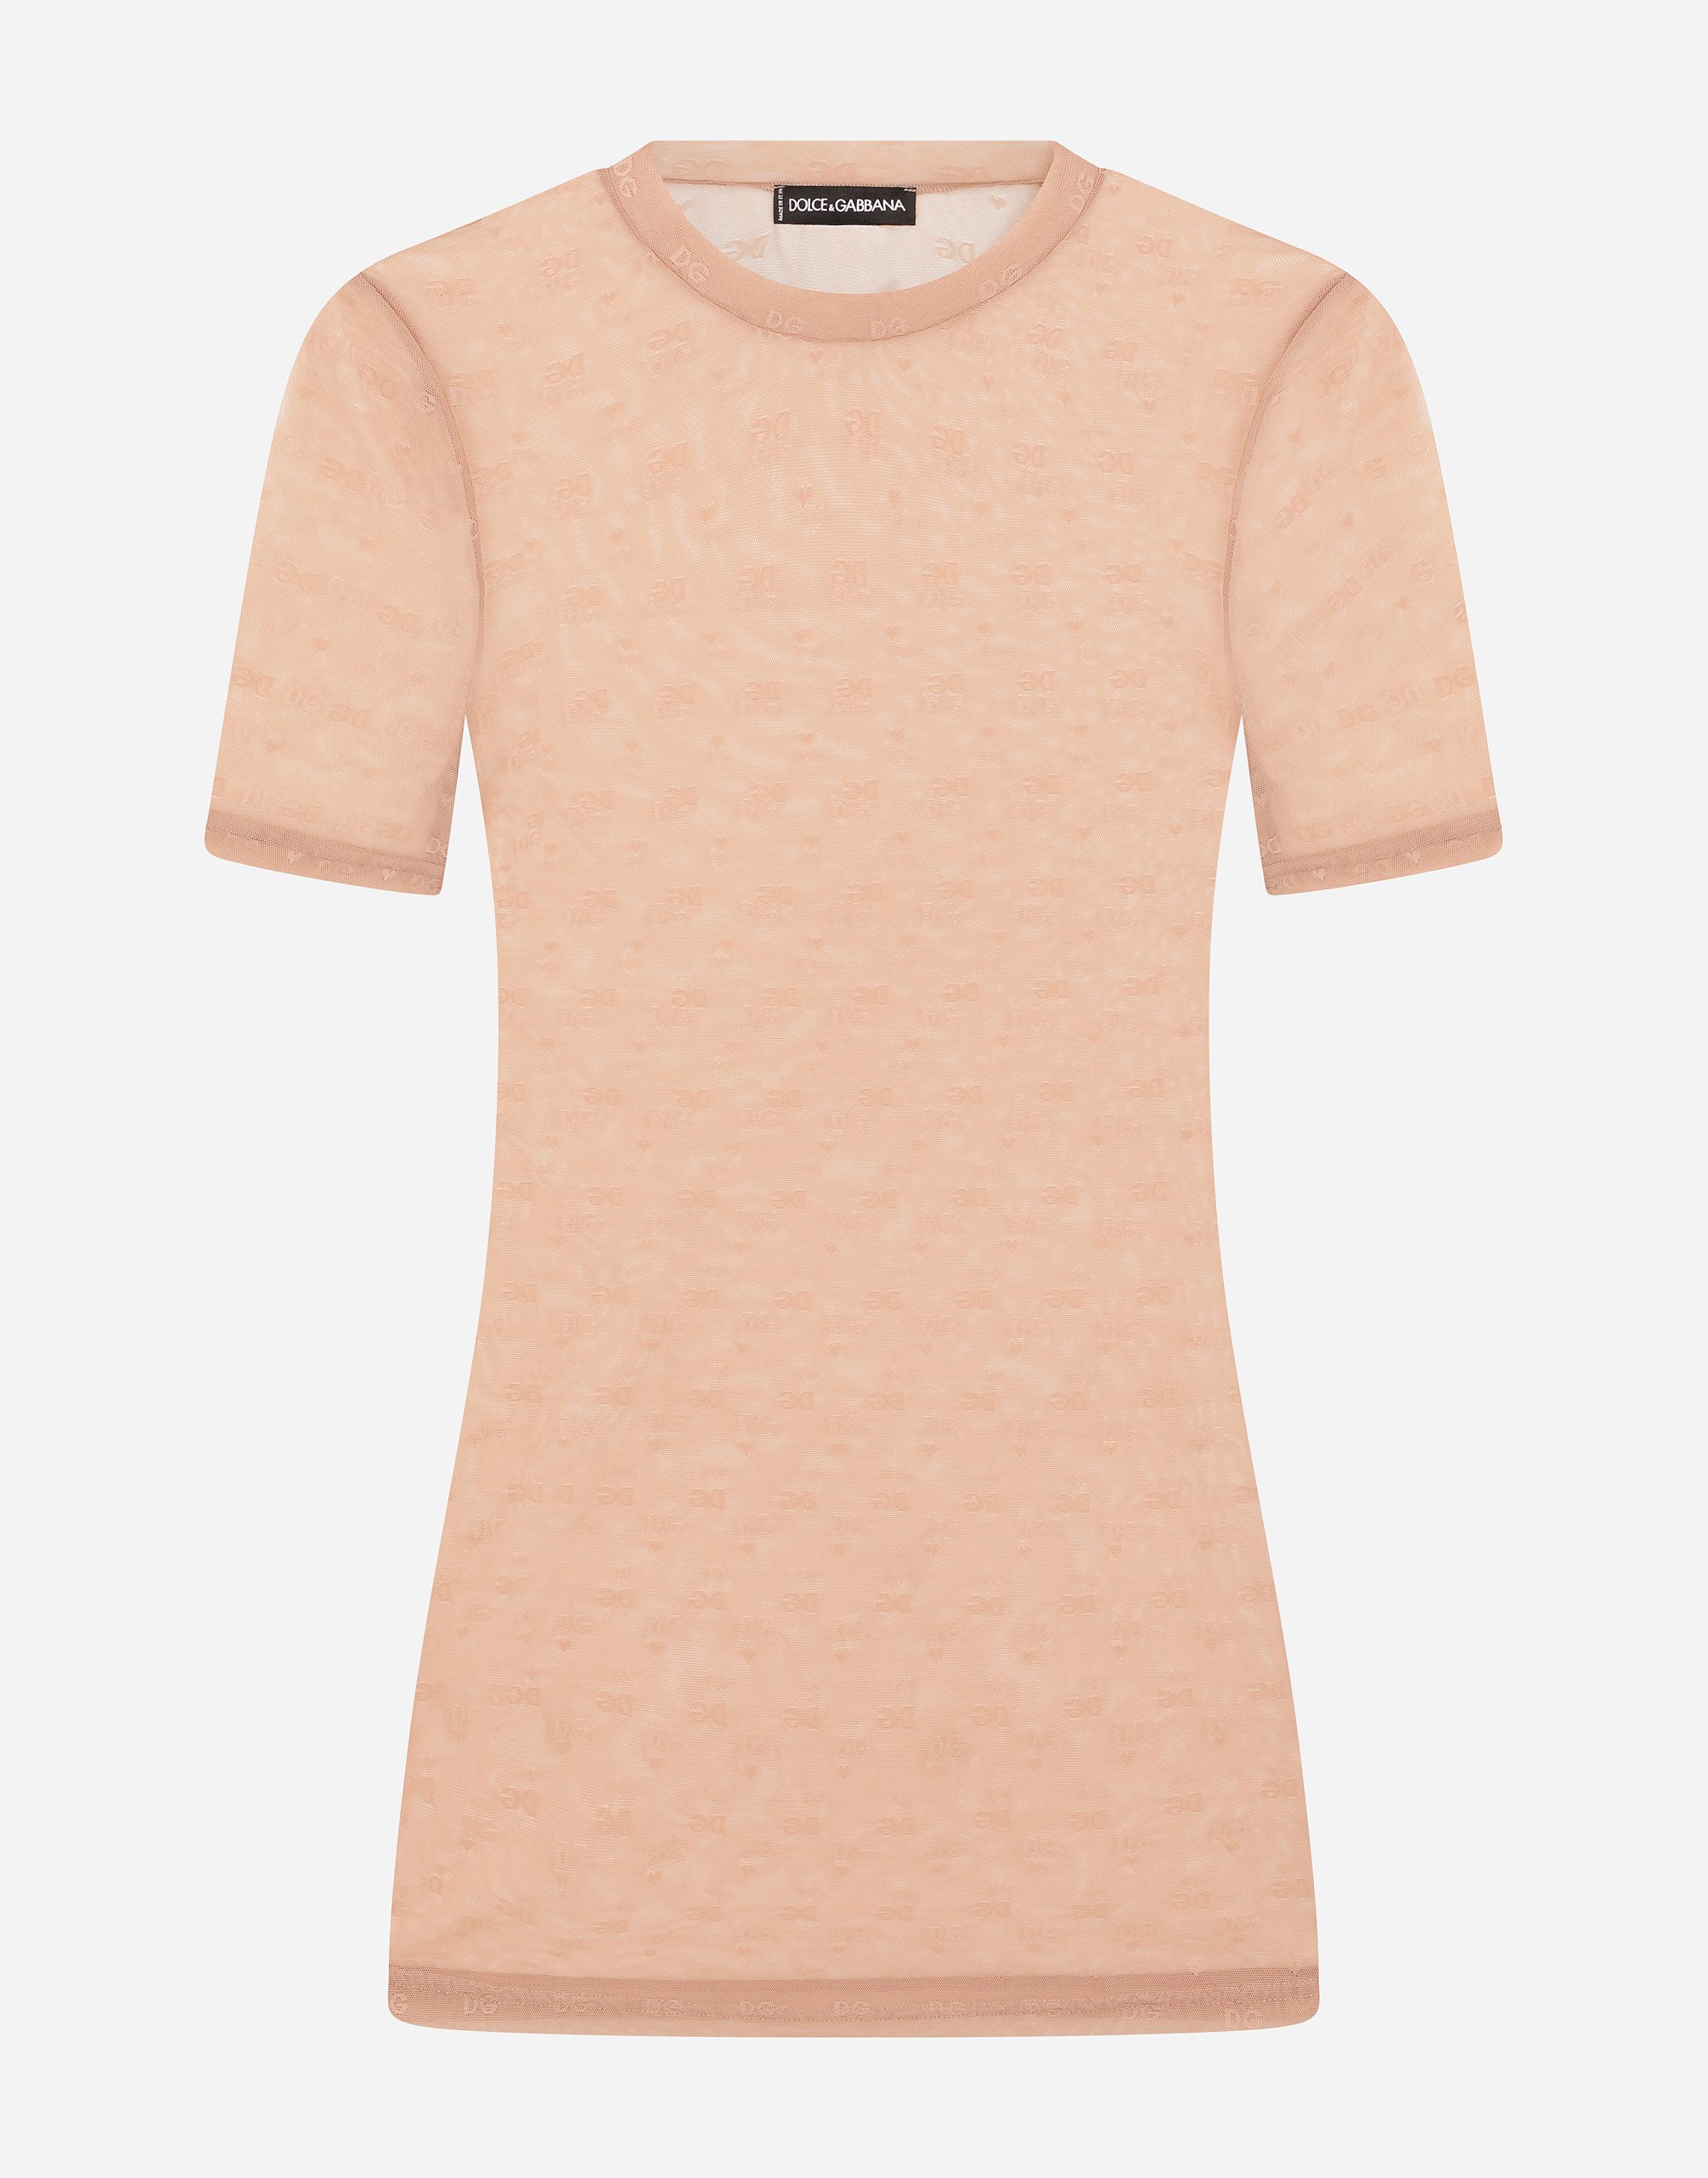 Jacquard tulle T-shirt in Beige